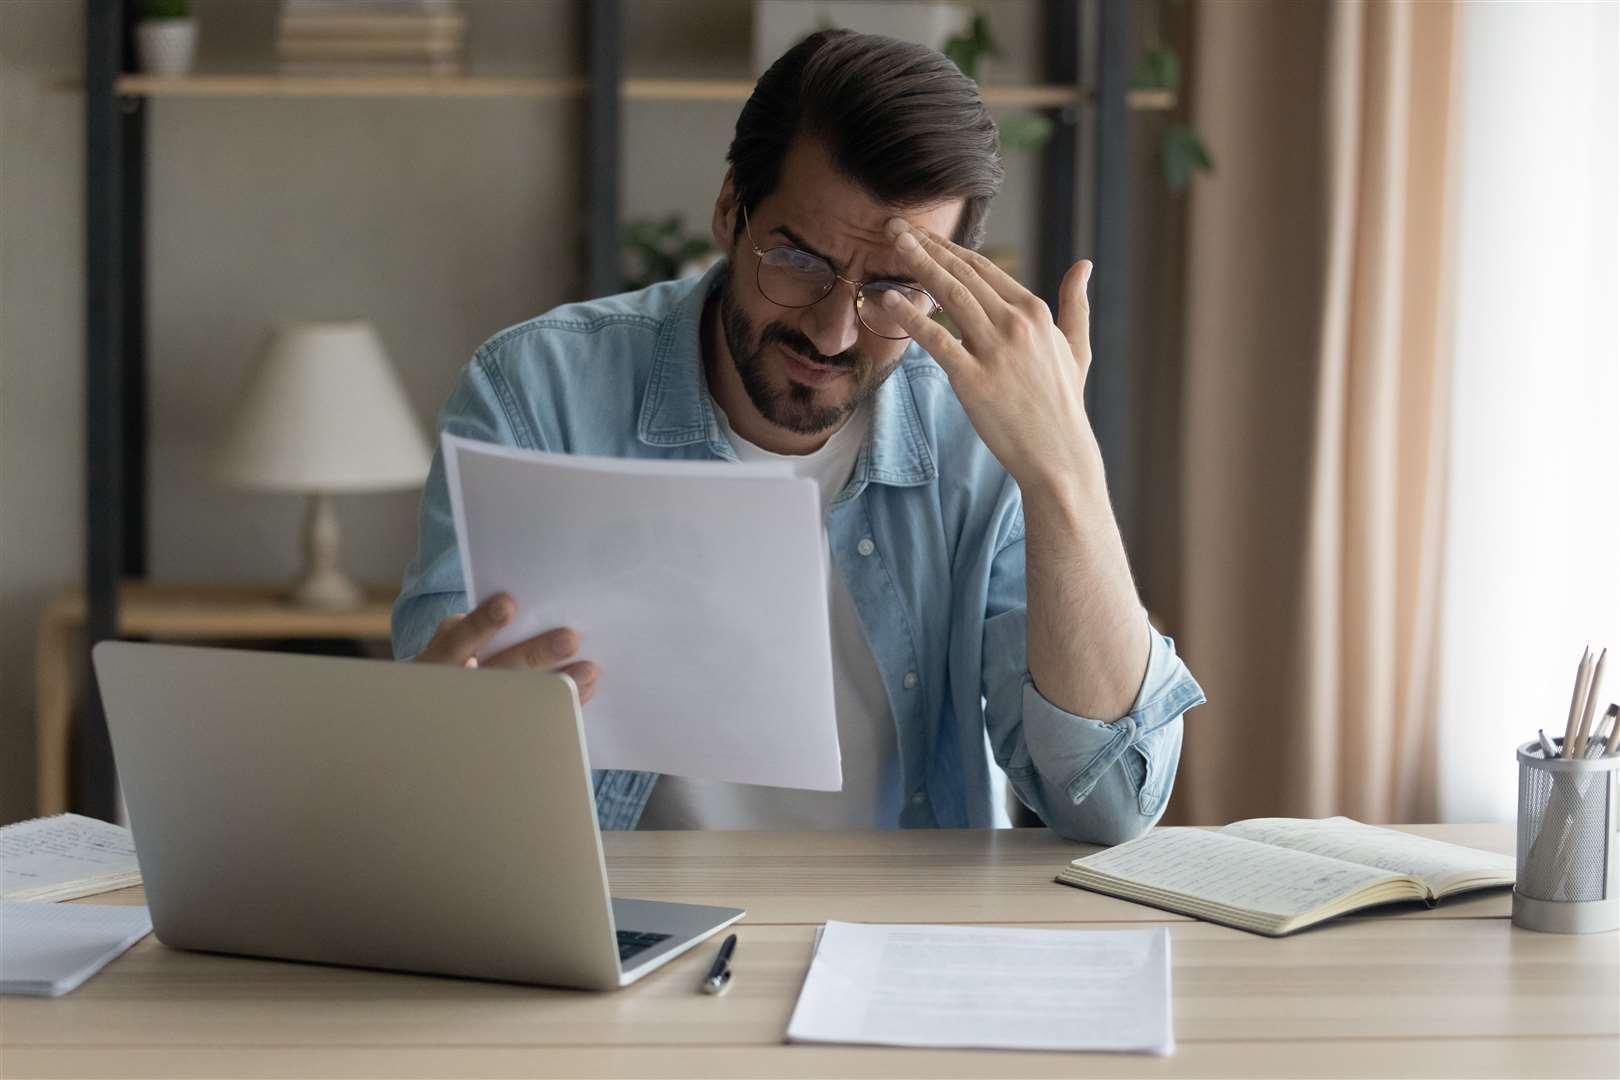 Those who can't afford to pay are being encouraged to speak to their energy provider. Image: iStock.